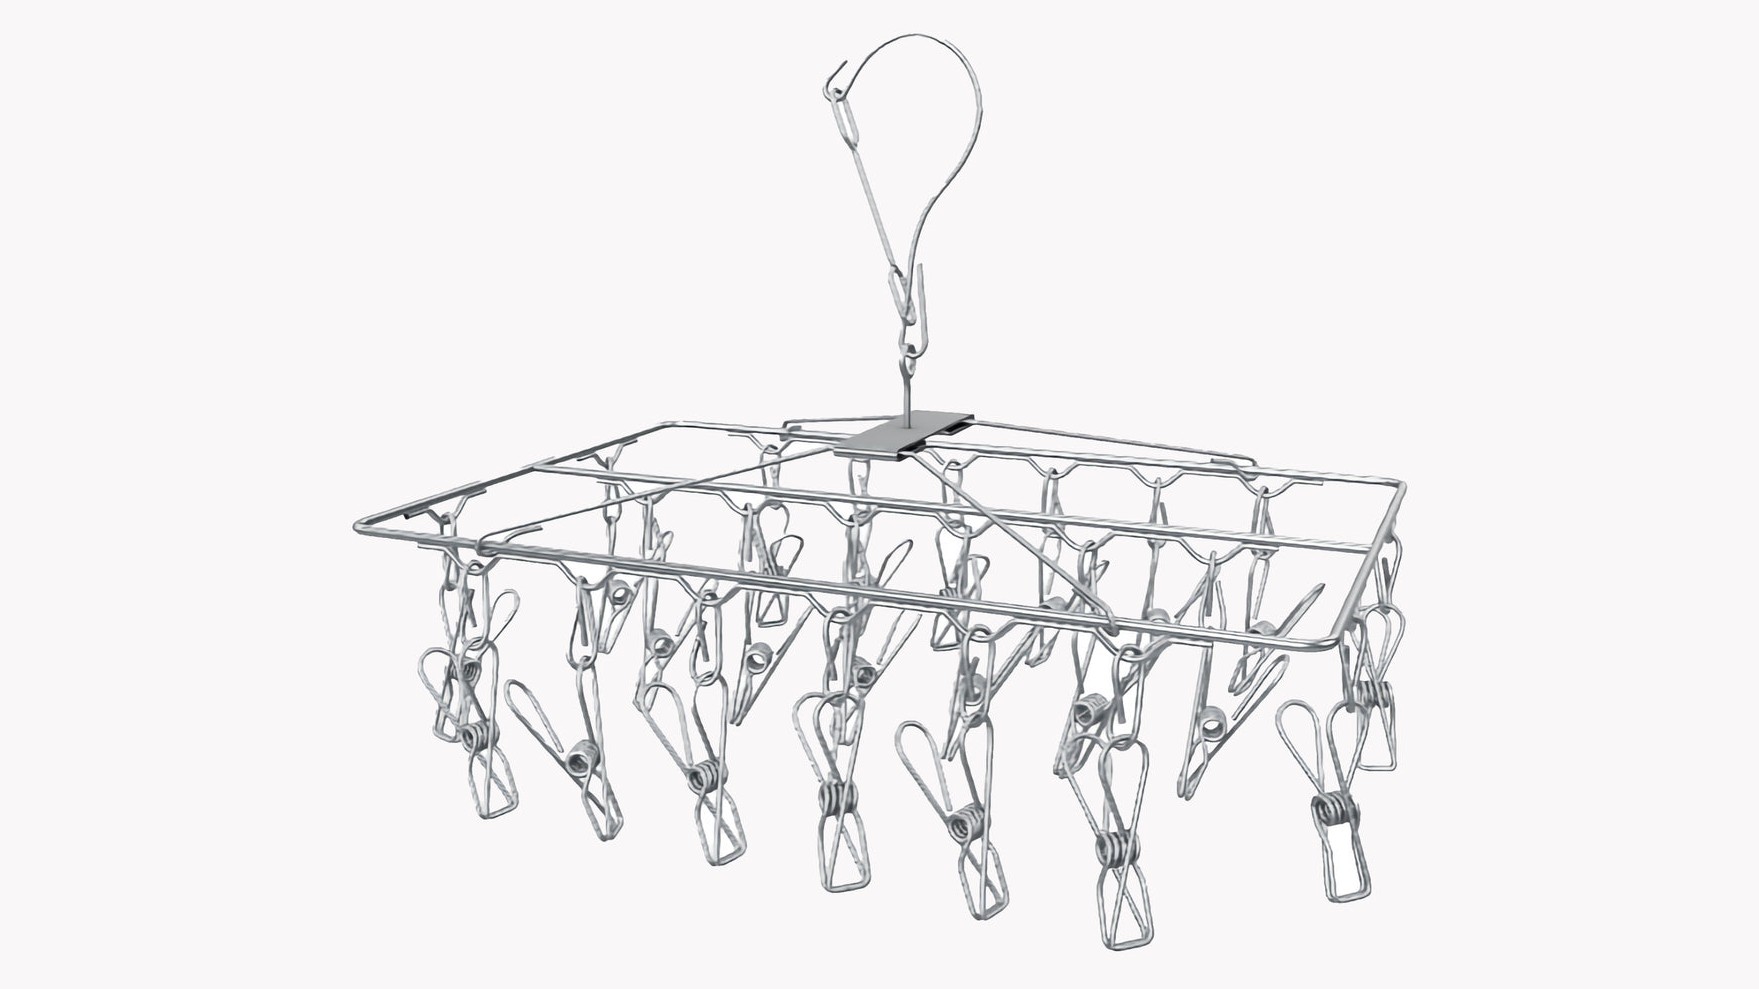 Portable Clotheslines Keep Peg Stainless Steel Peg Airer and Sock Hanger